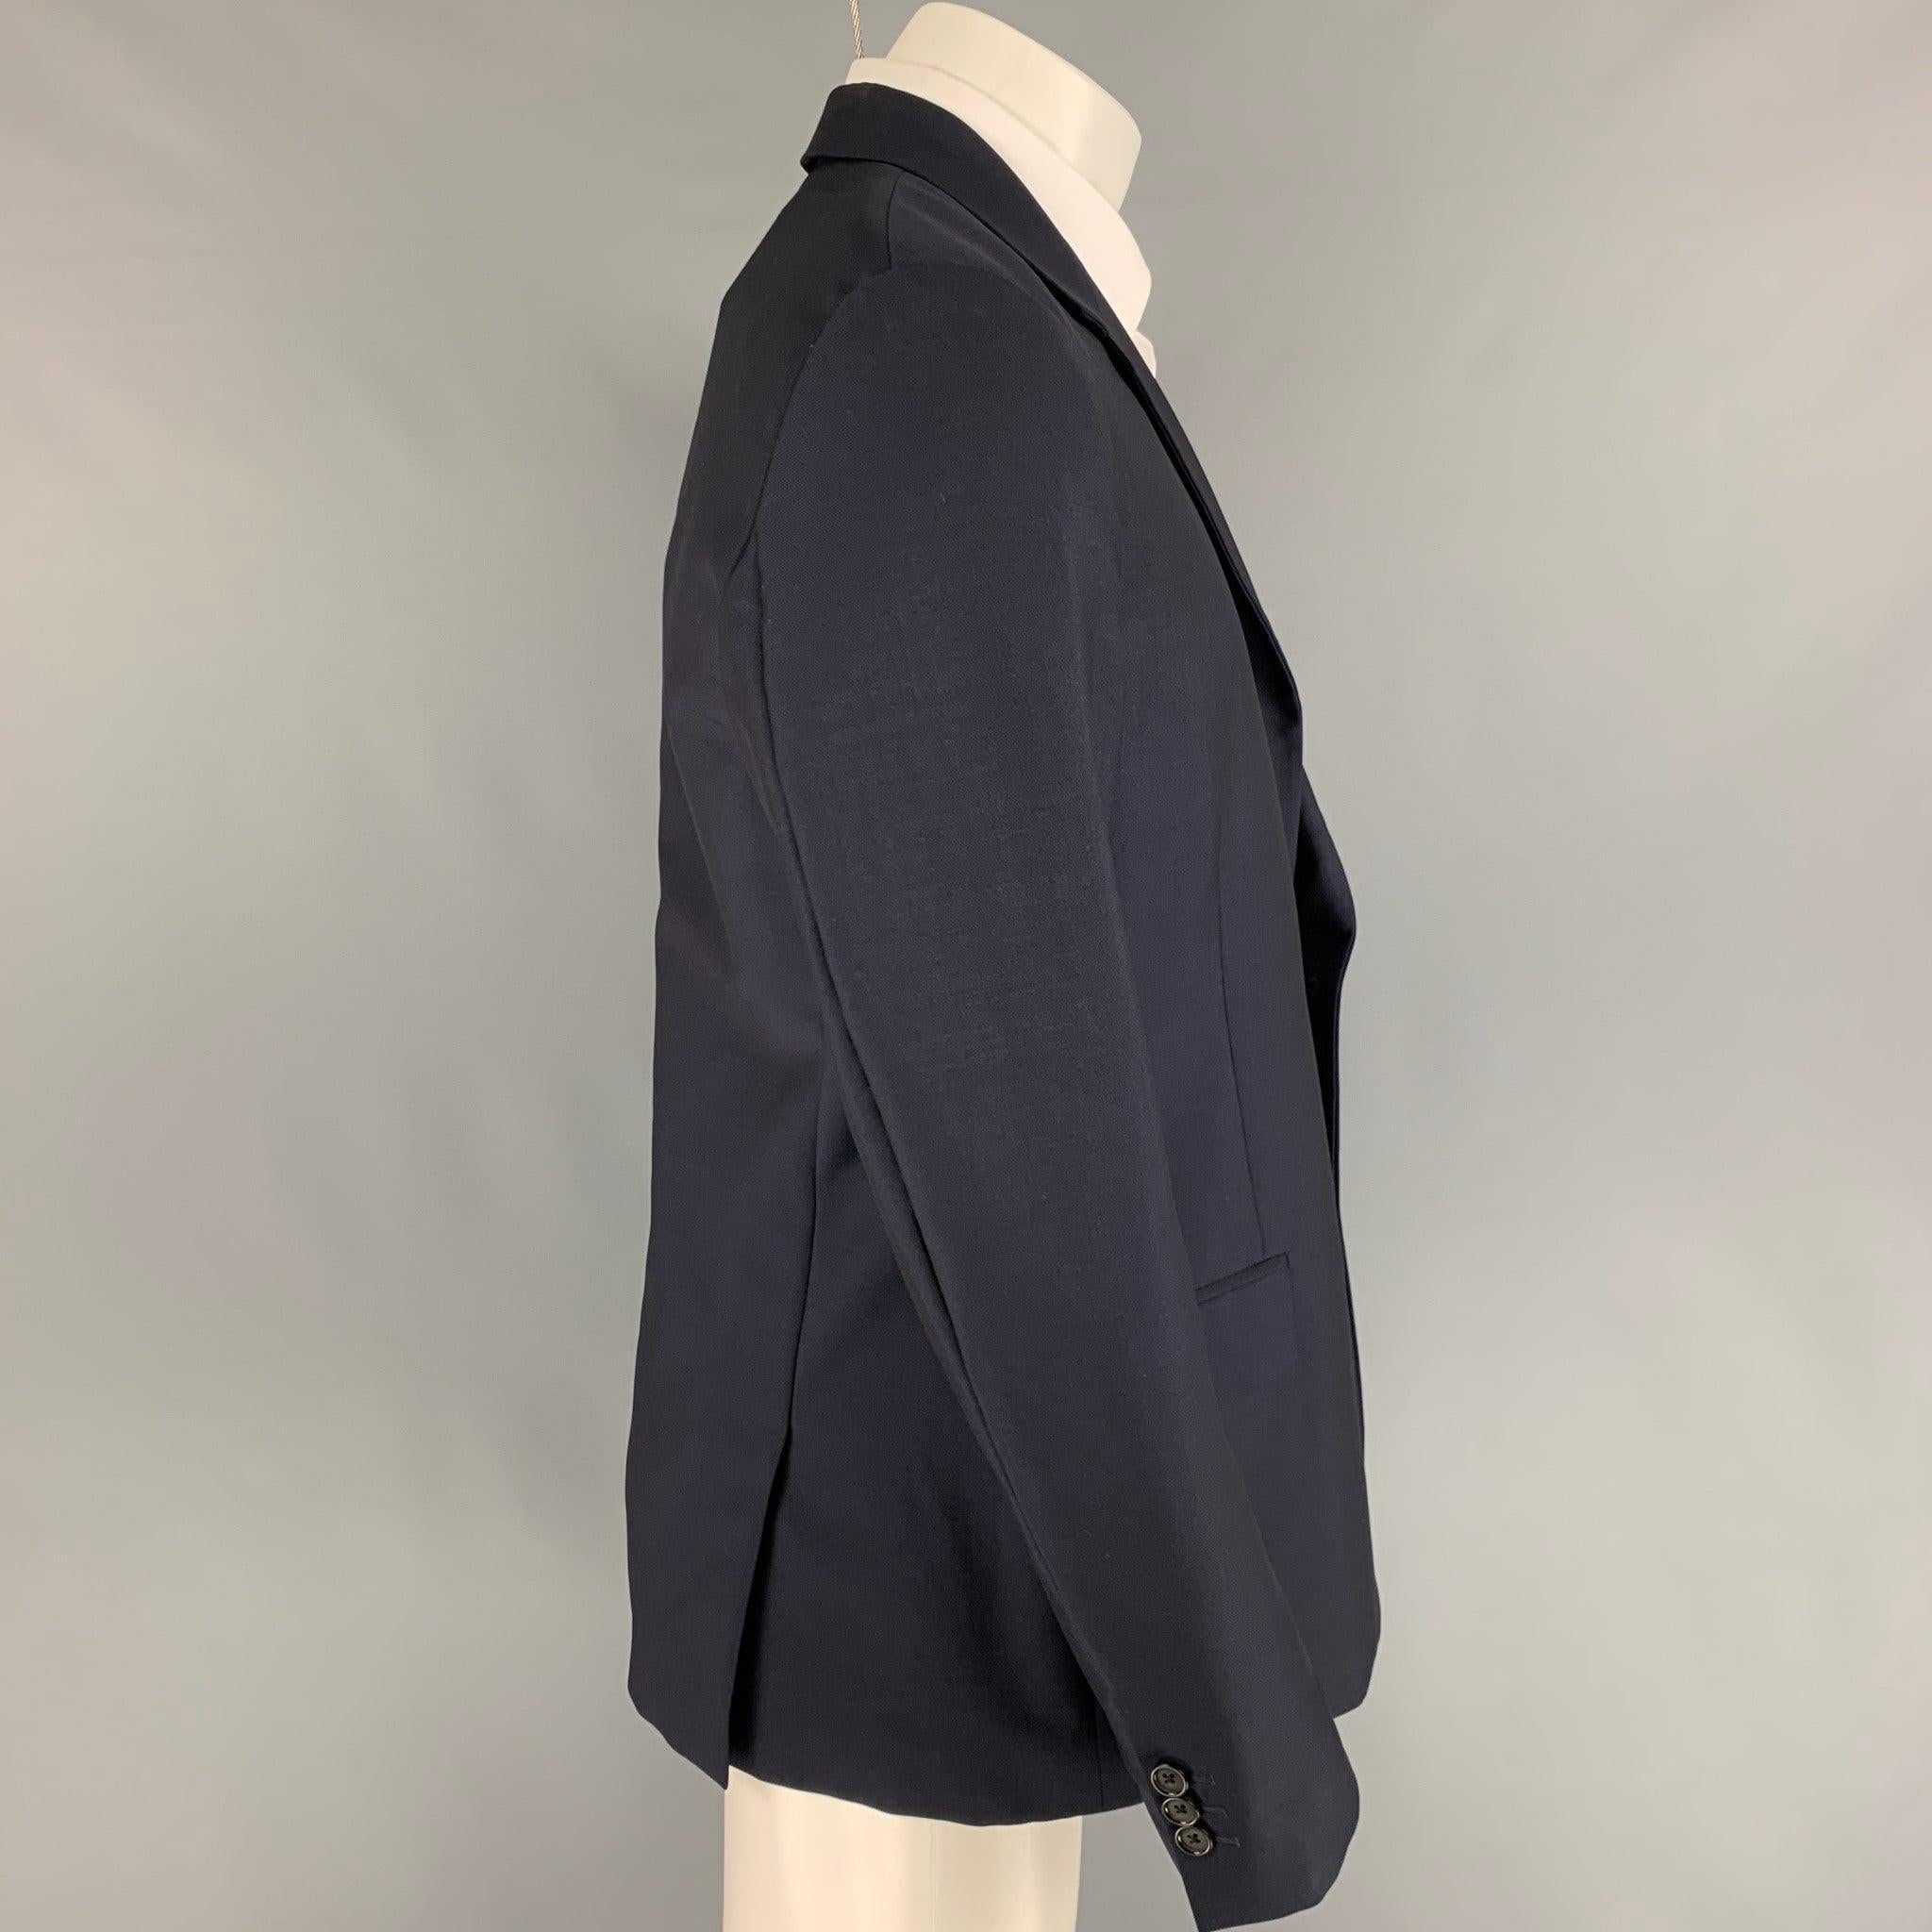 ALEXANDER McQUEEN sport coat comes in a navy wool with a full liner featuring a notch lapel, flap pockets, double back vent, and a double button closure. Made in Italy.
Excellent
Pre-Owned Condition.  

Marked:   52 

Measurements: 
 
Shoulder: 18